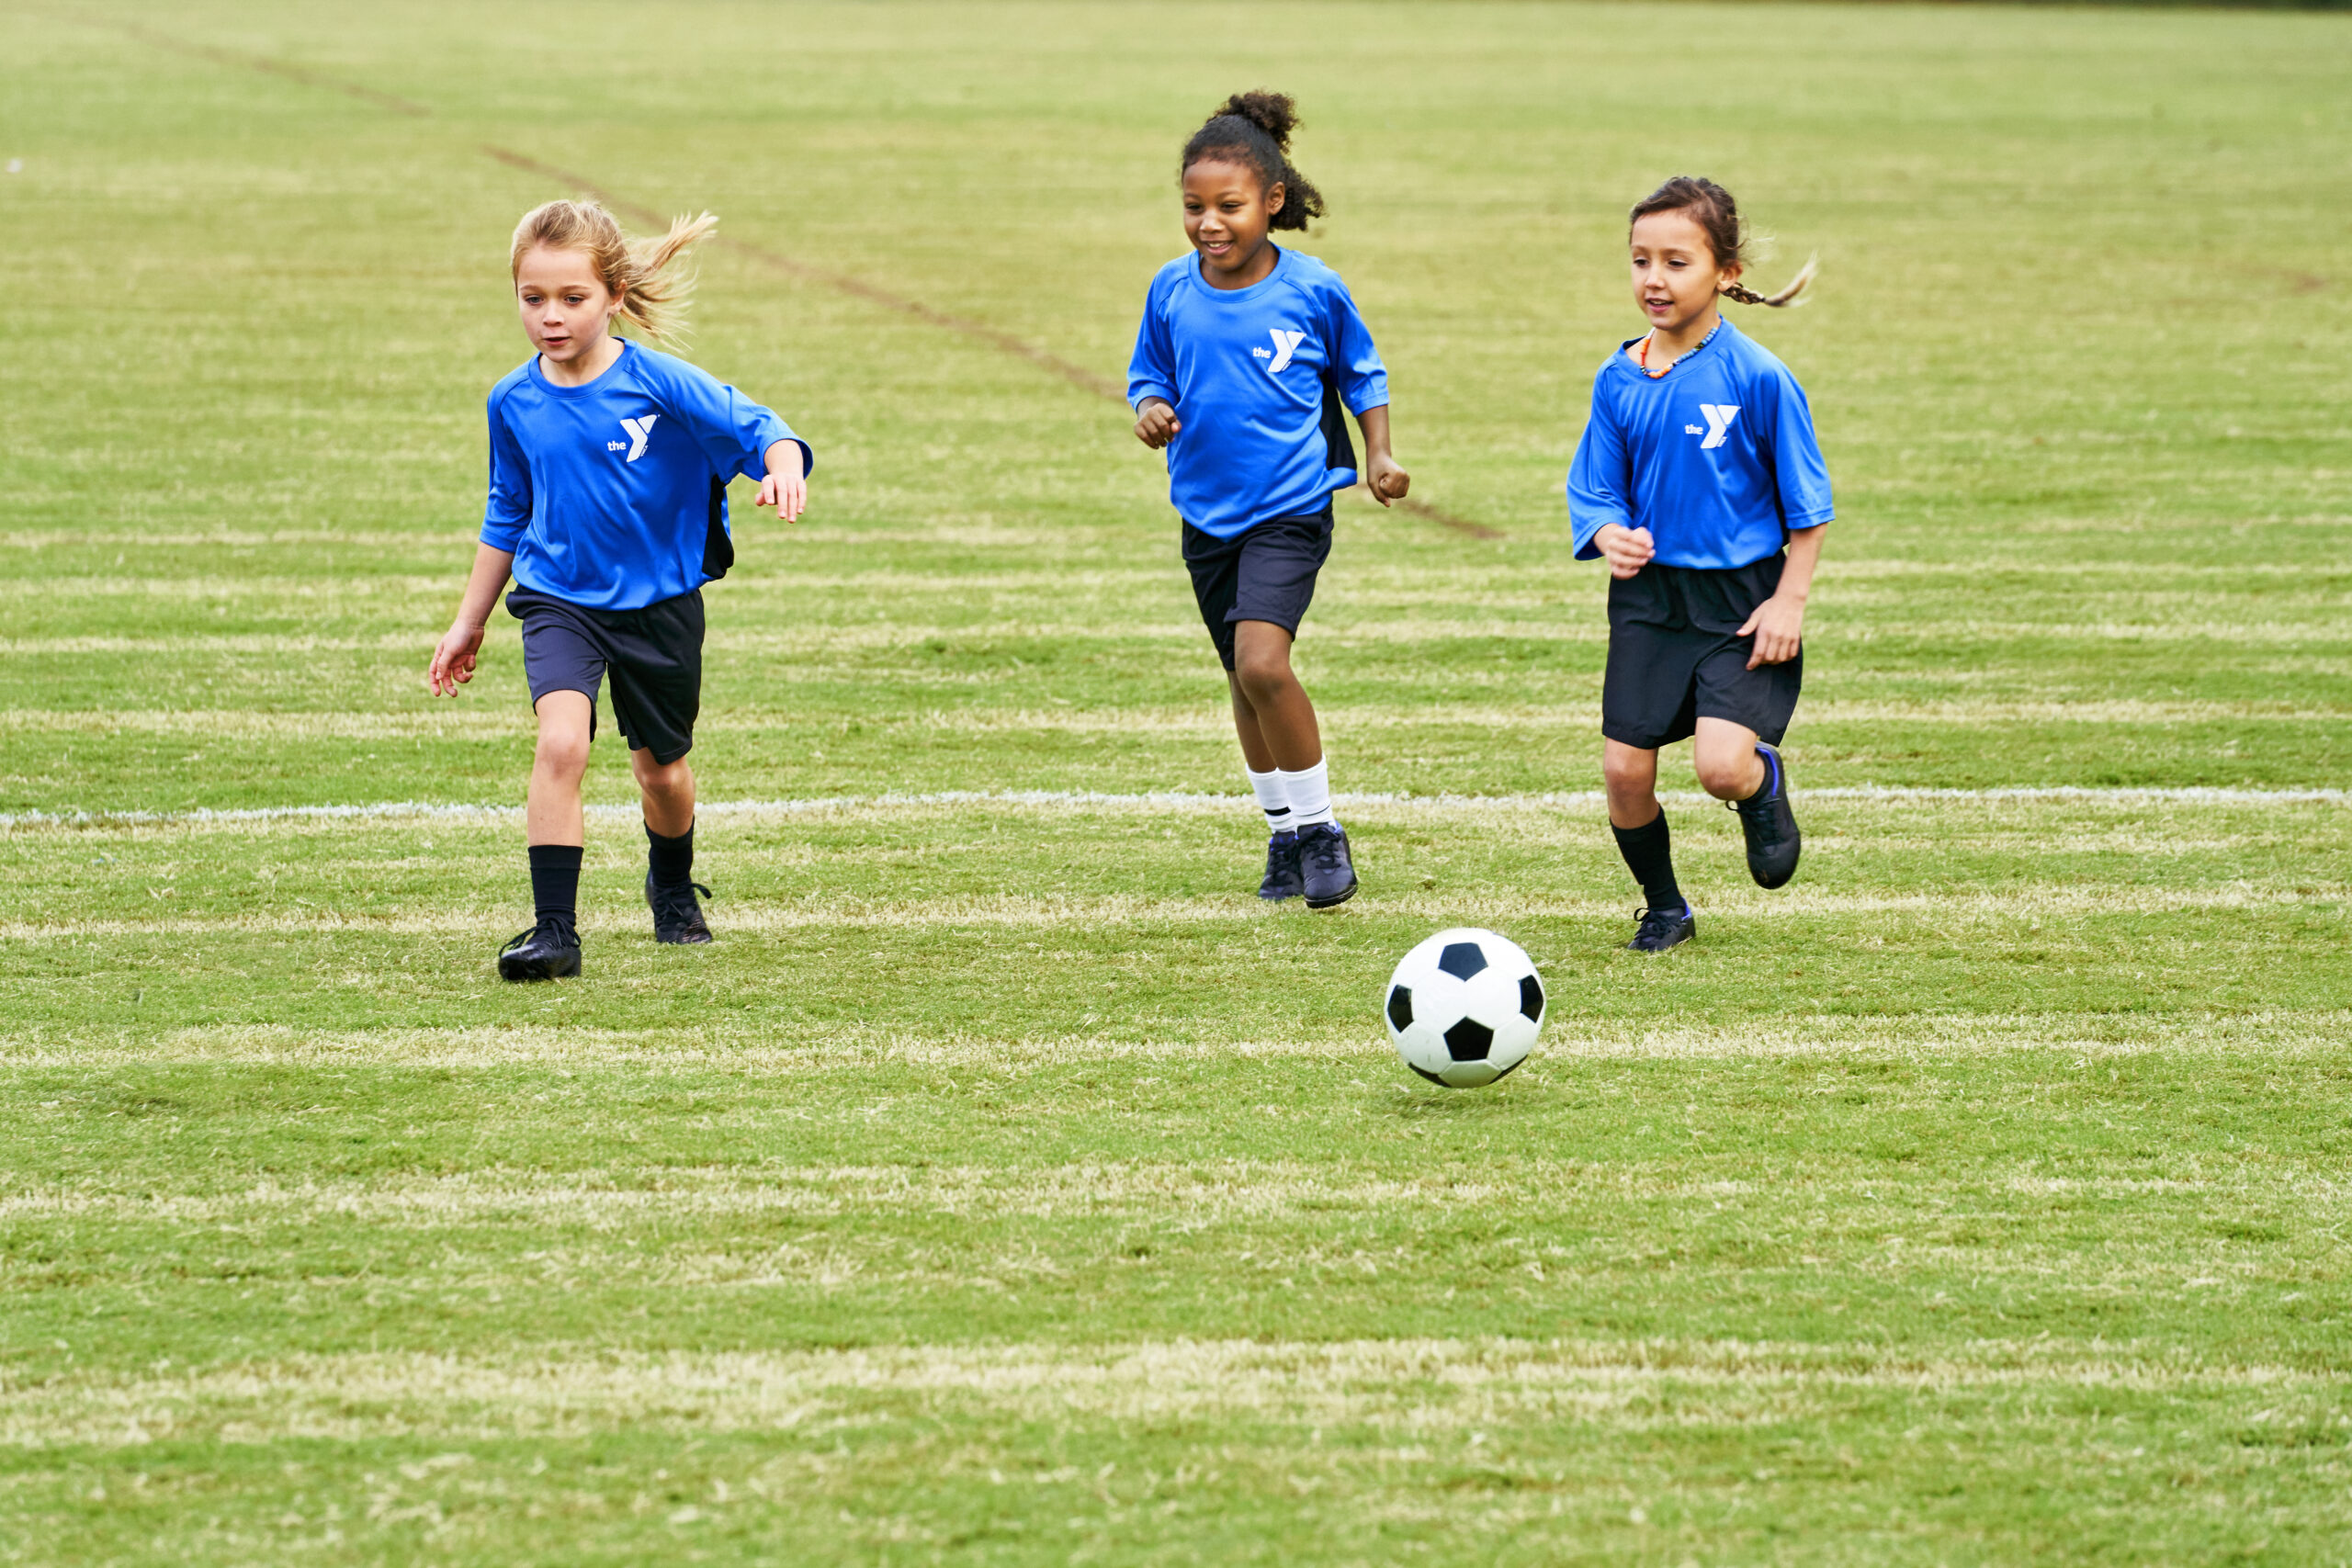 Young girls playing soccer